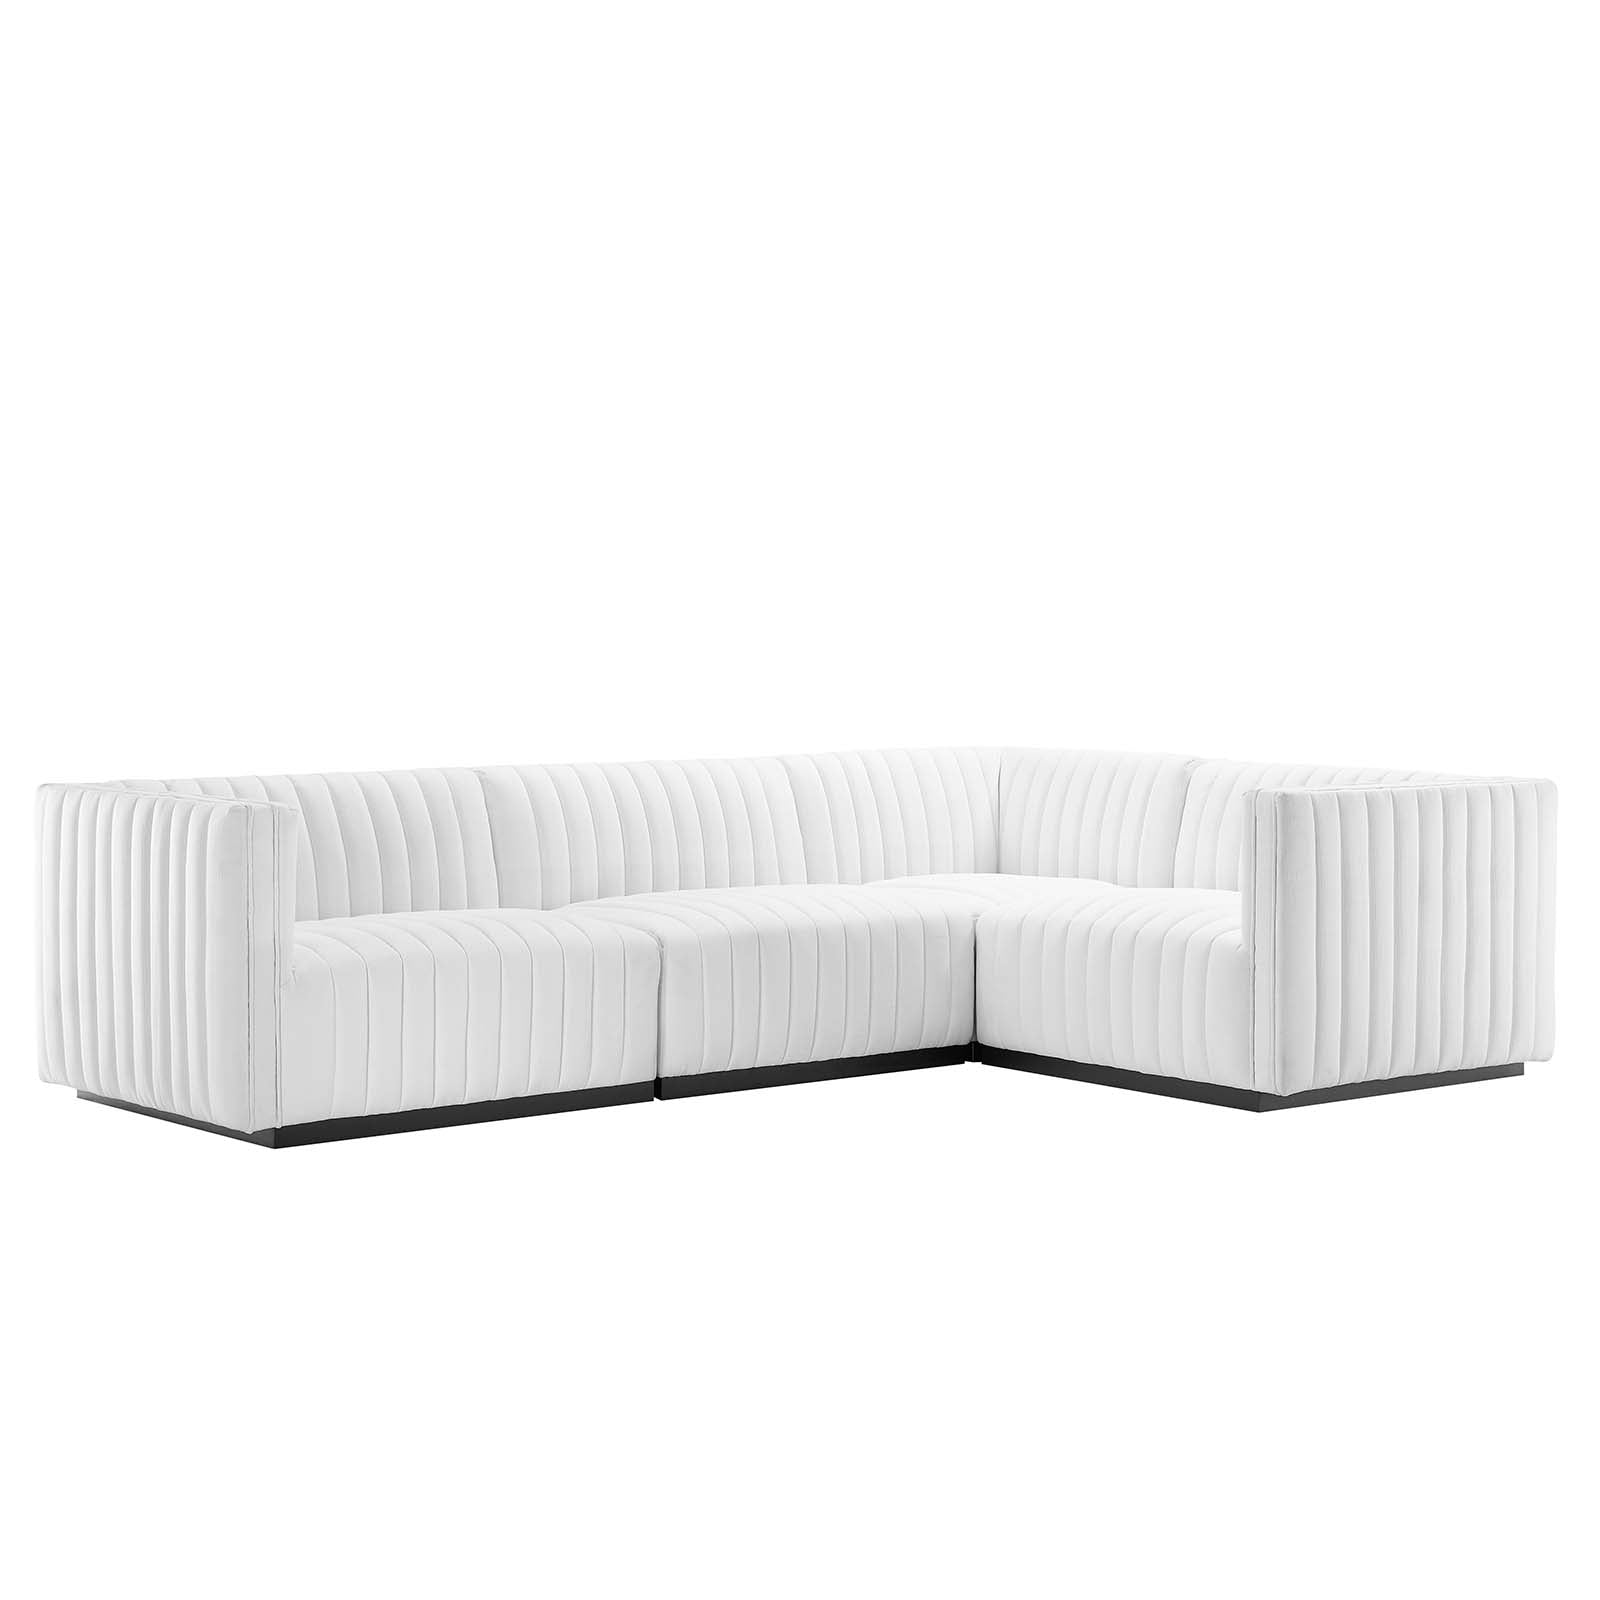 Modway Sectional Sofas - Conjure Channel Tufted Upholstered Fabric 4-Piece L-Shaped Sectional Black White